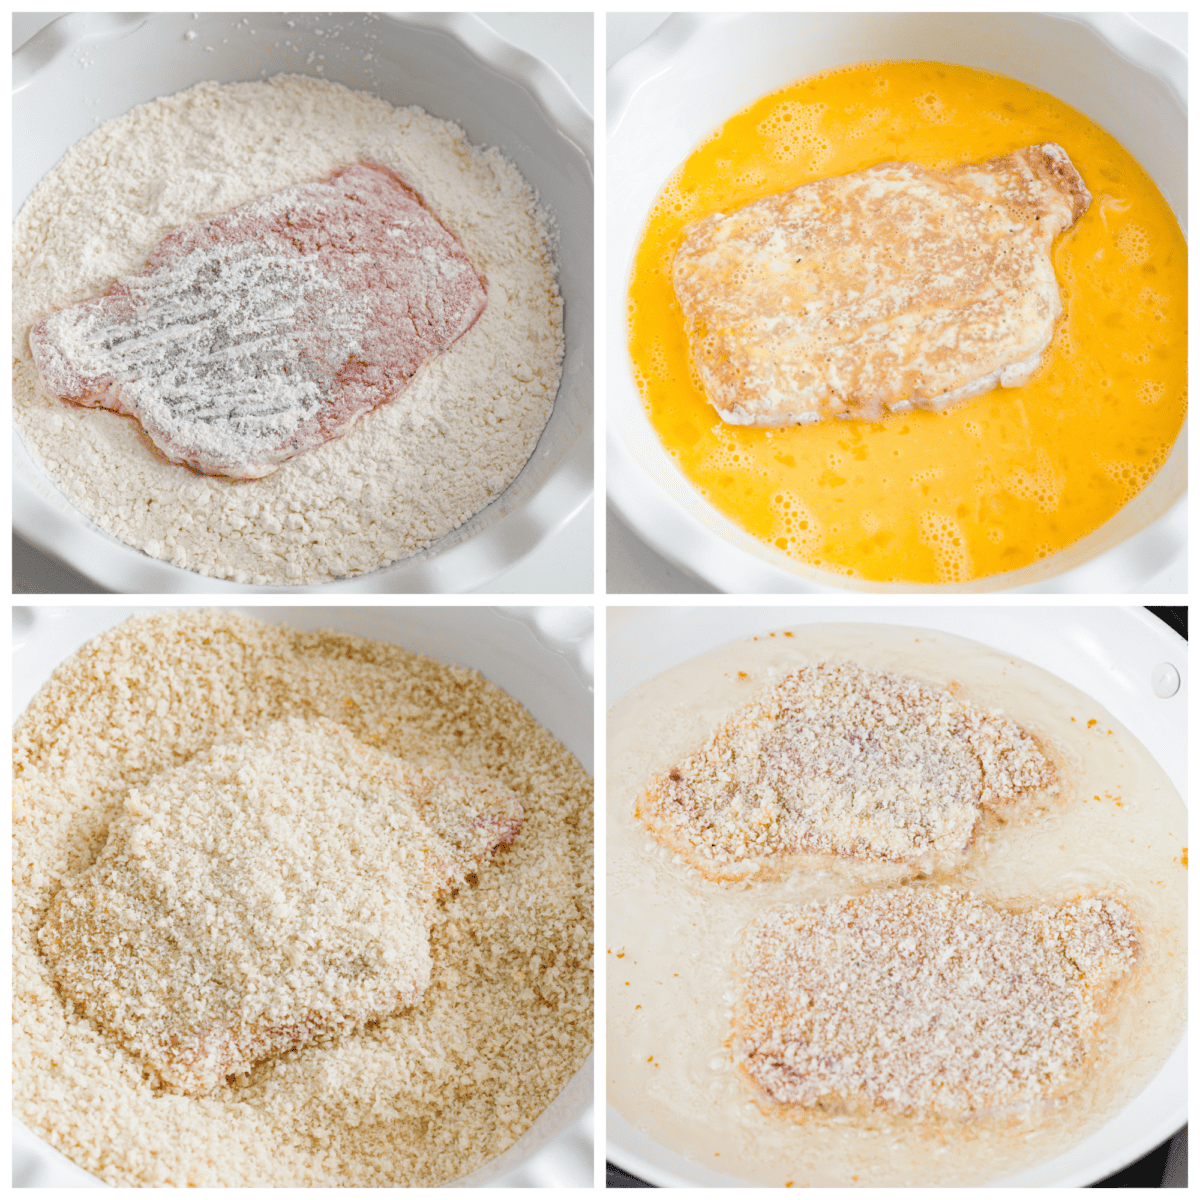 4-photo collage of pork schnitzel being prepared. (Dredged in flour, egg, and bread crumbs.)